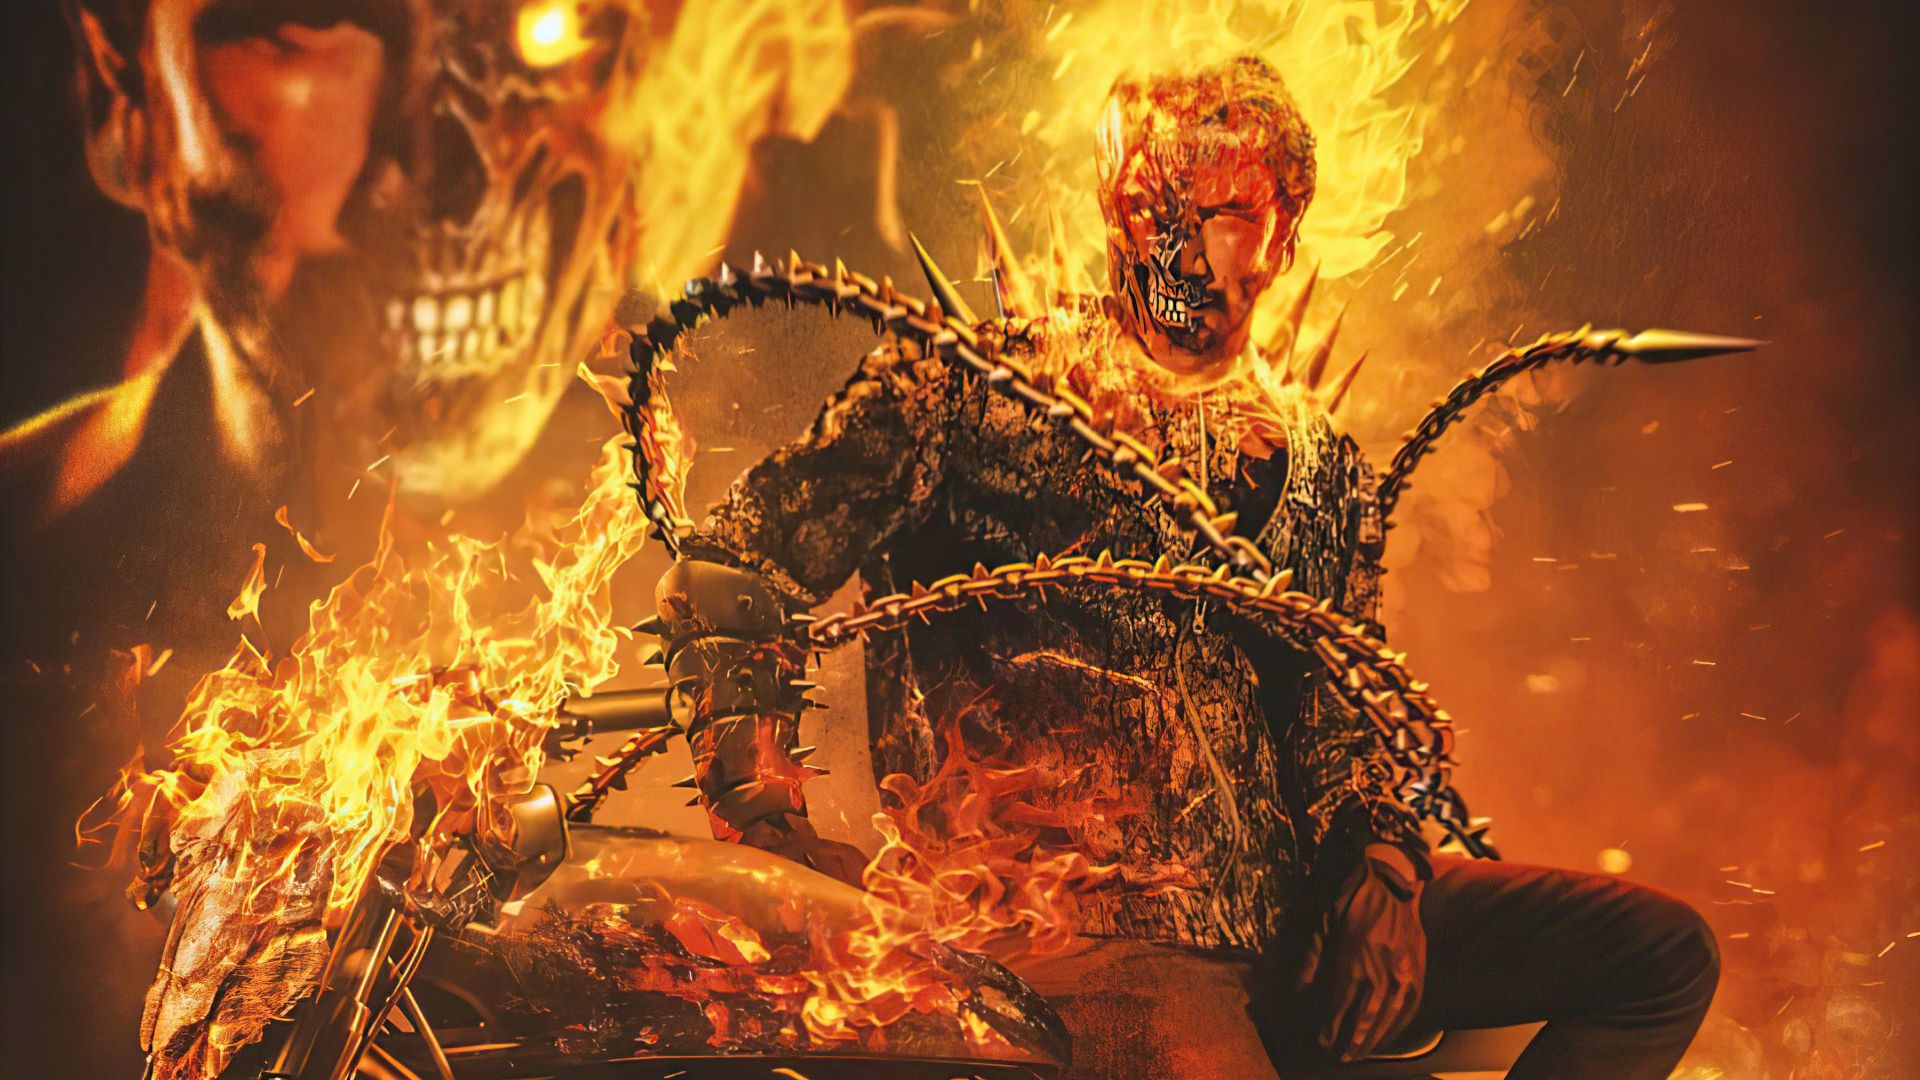 4K Ghost Rider Wallpapers